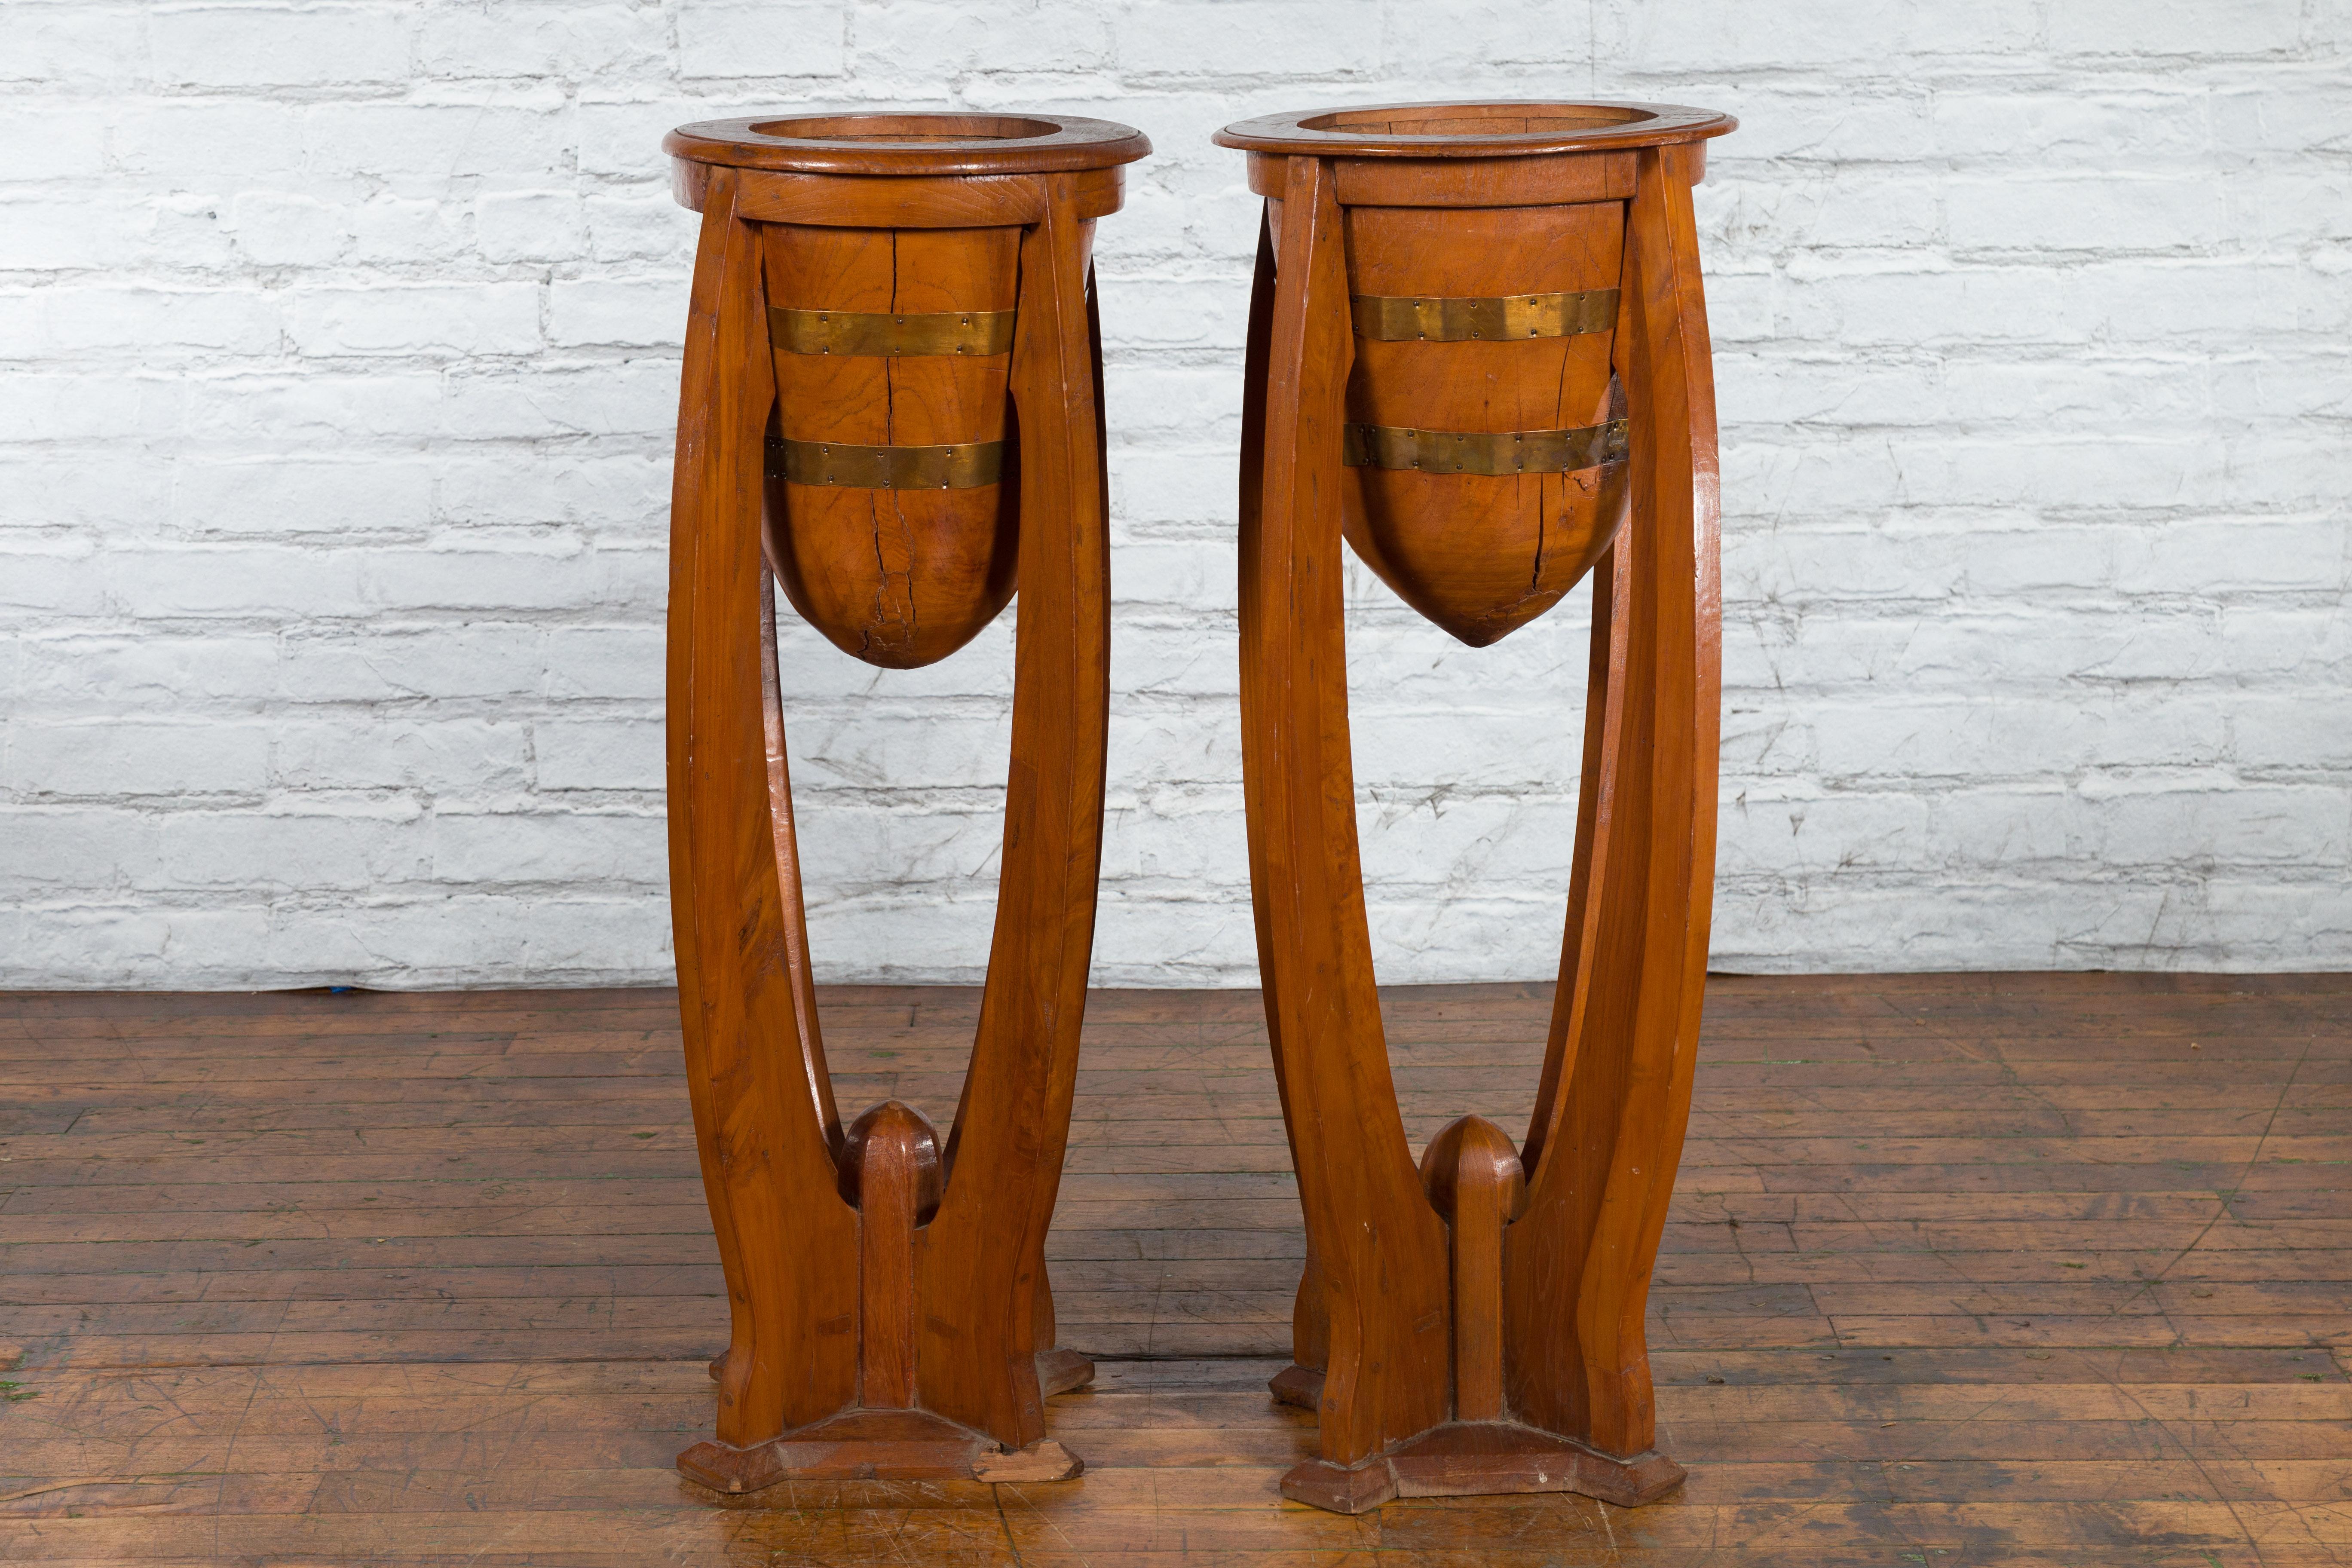 Large Pair of Javanese Art Deco Style Teak Wood Plant Stands with Brass Braces For Sale 9